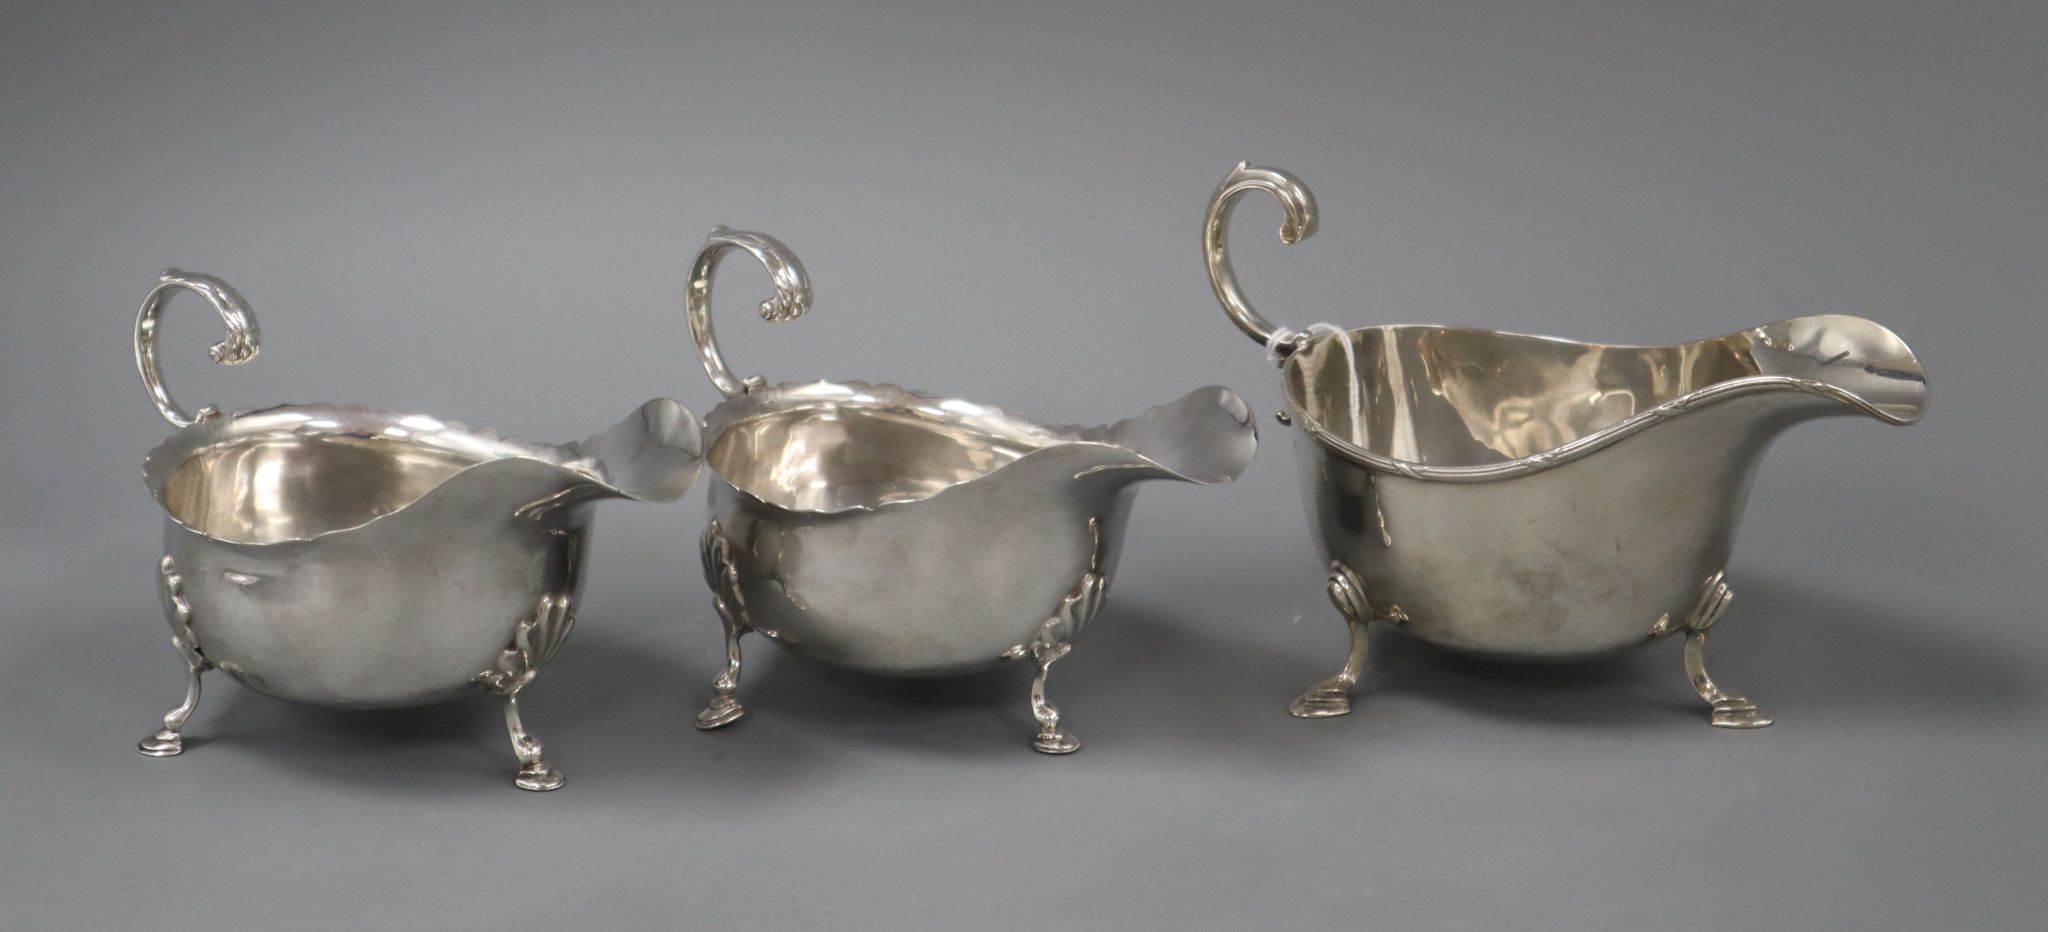 A pair of Edwardian silver sauceboats, Nathan & Hayes, Chester, 1905 and one other silver